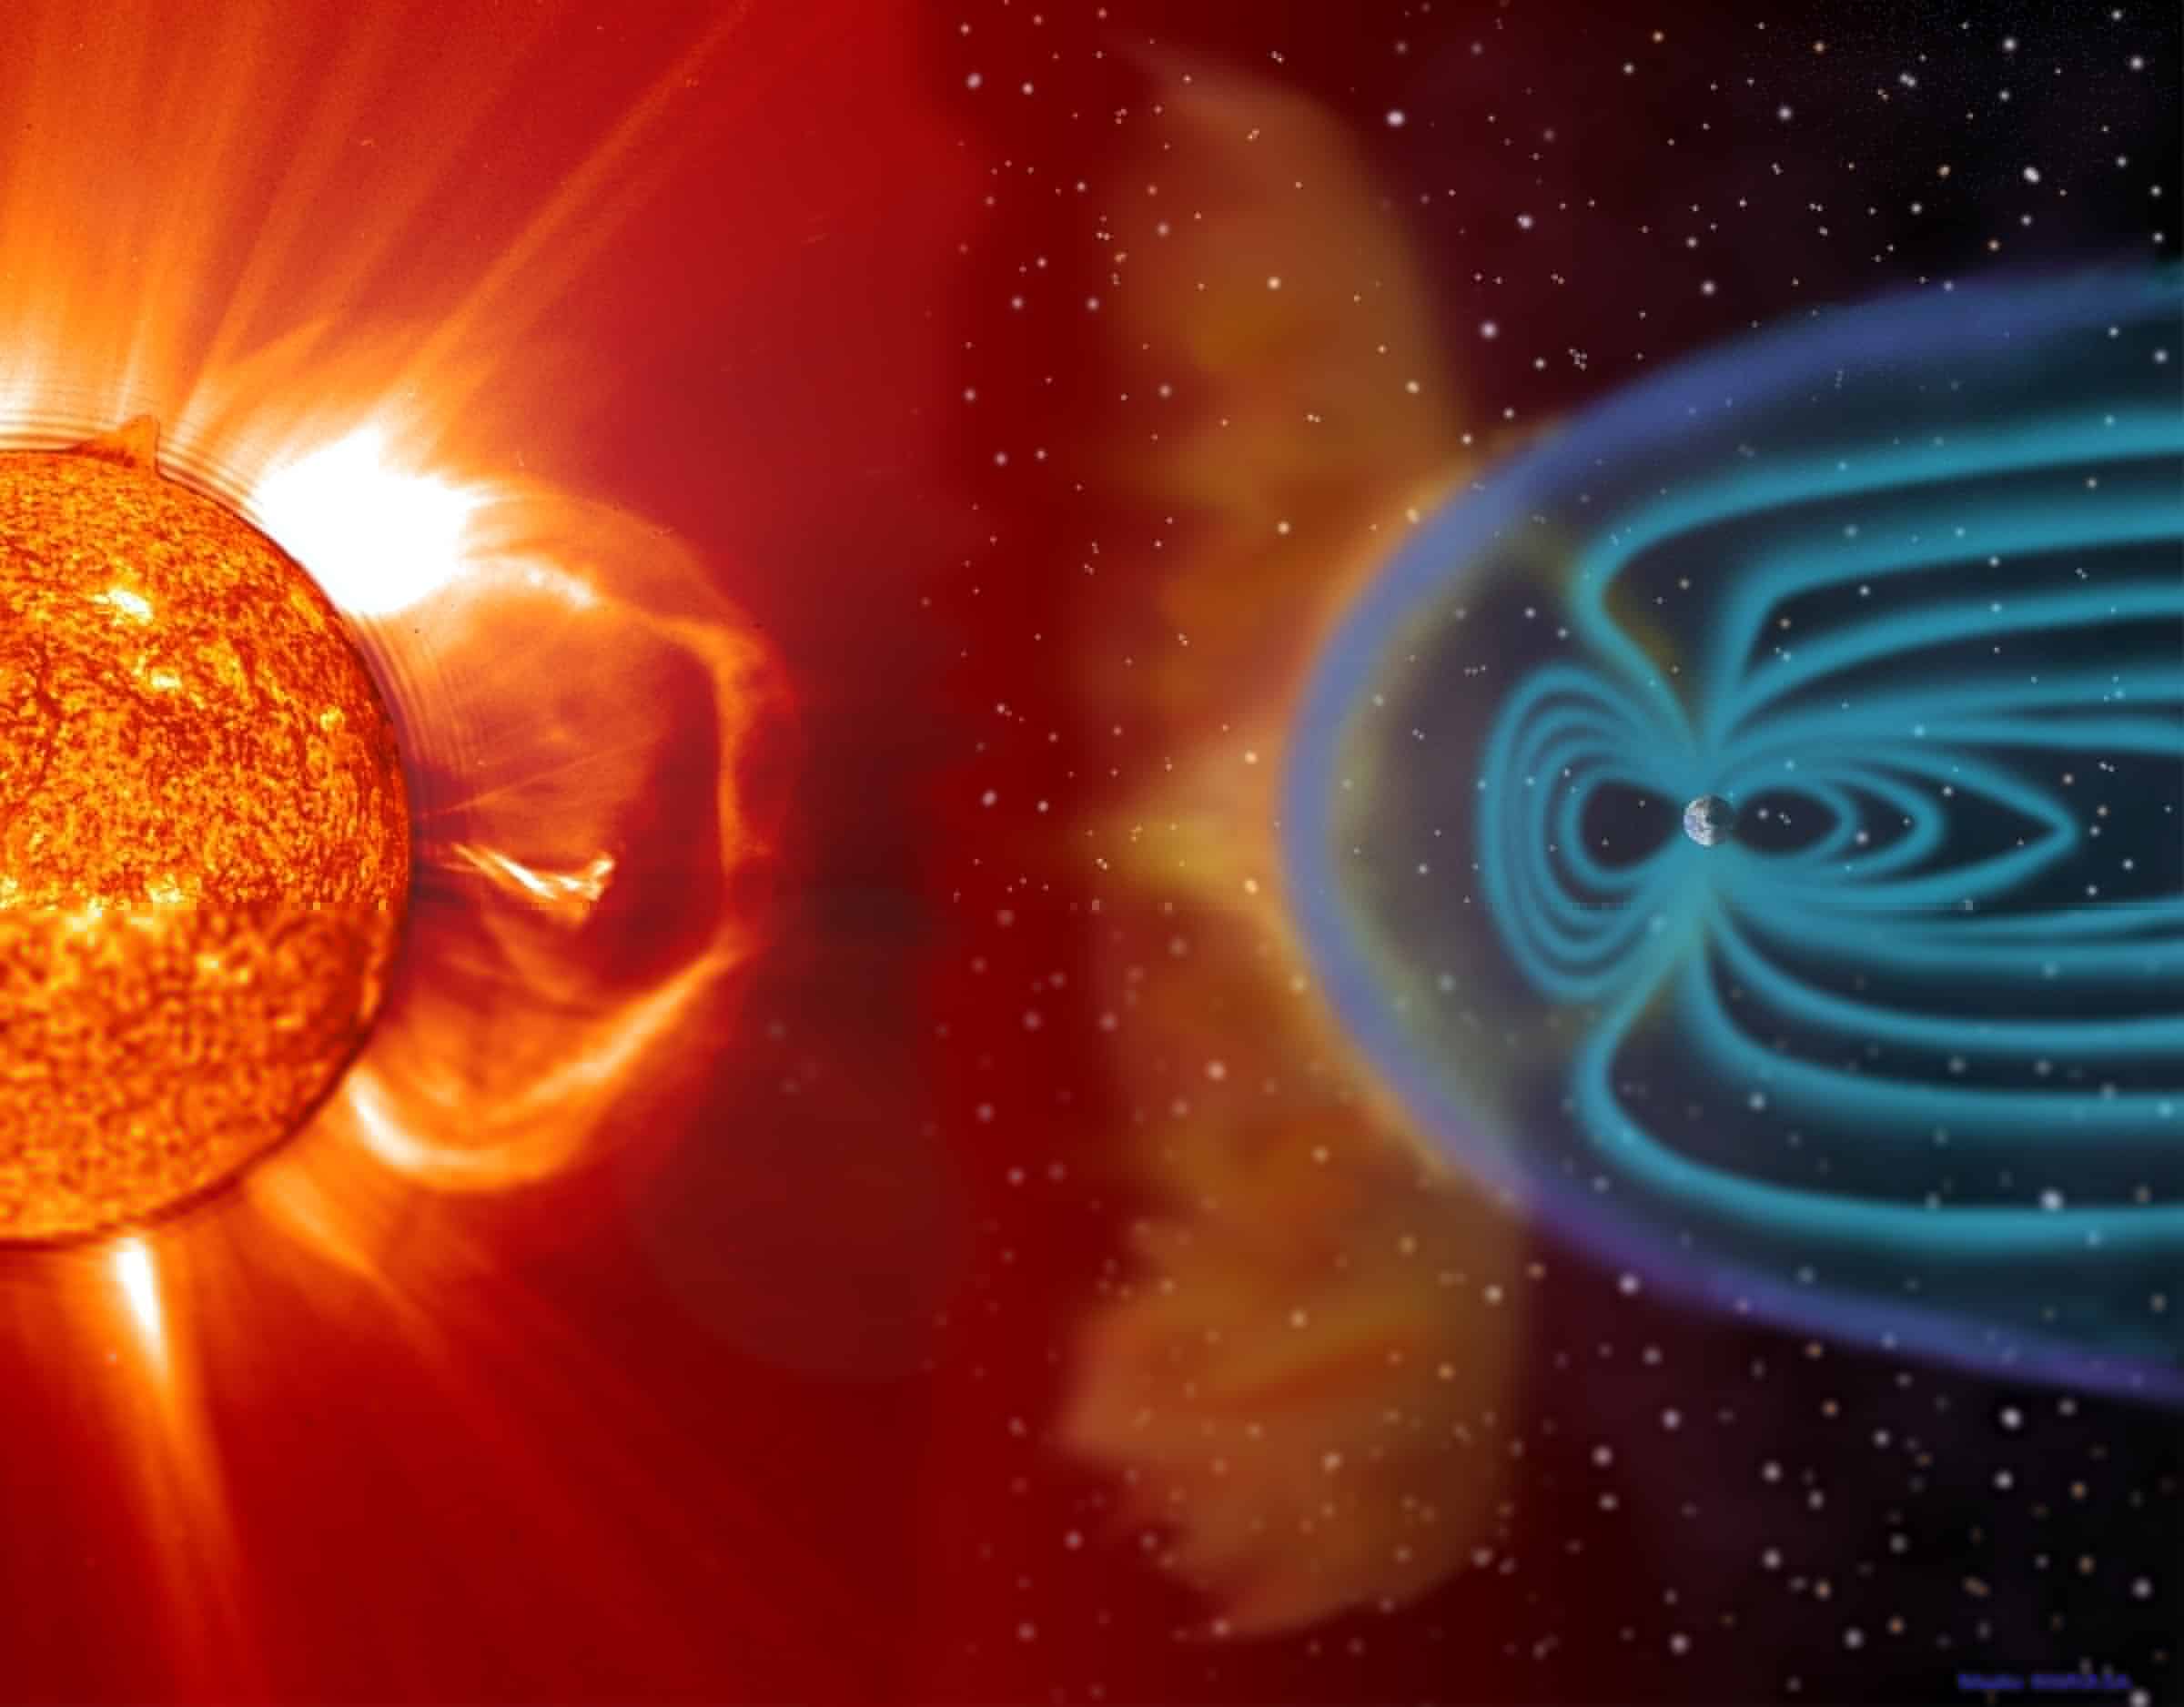 Coronal mass ejection CME blast and subsequent impact at Earth